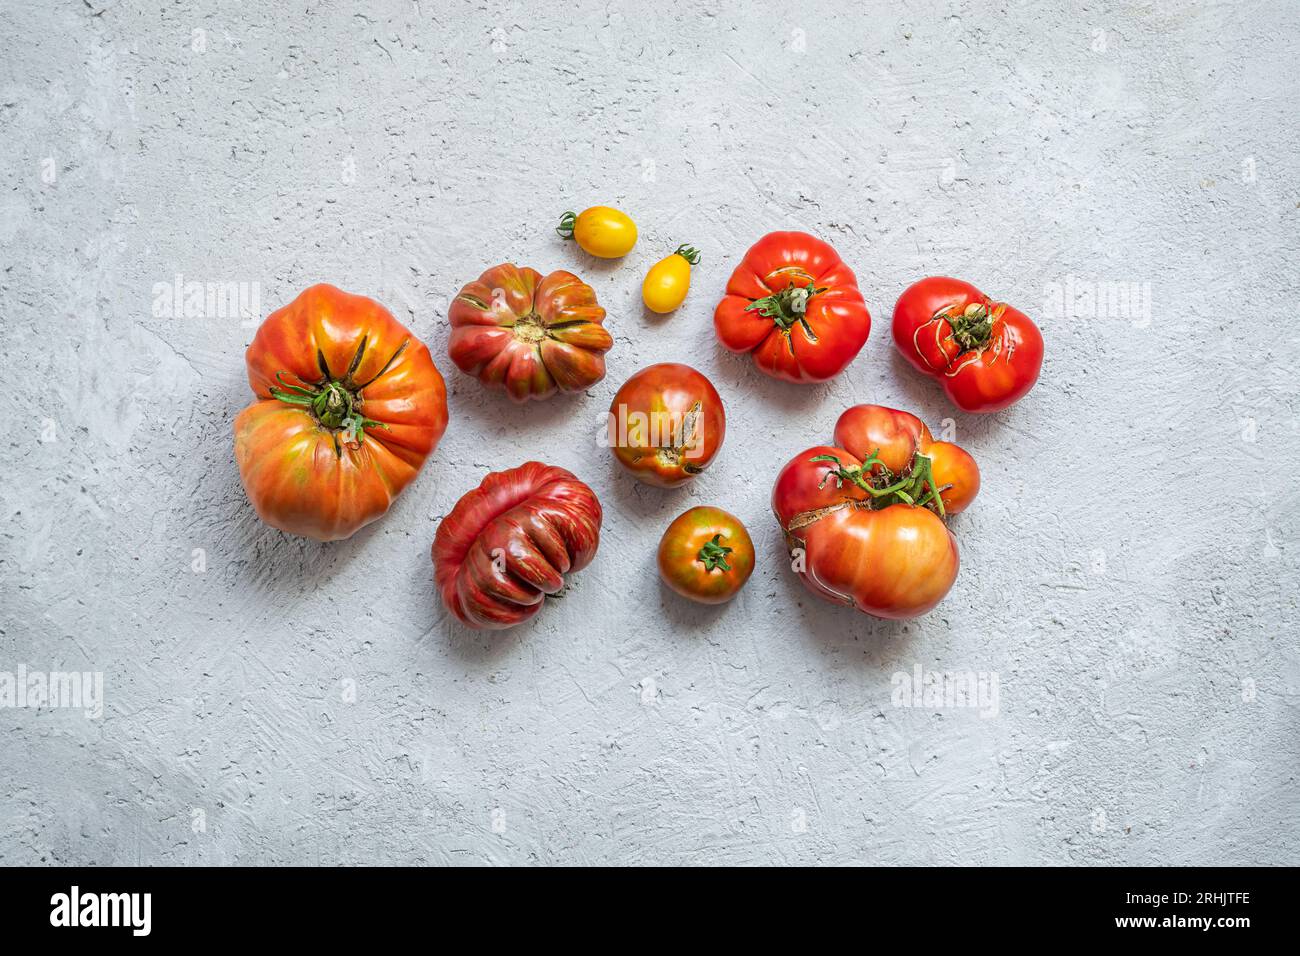 Ugly organic untreated tomatoes on the gray background. Food waste concept Stock Photo